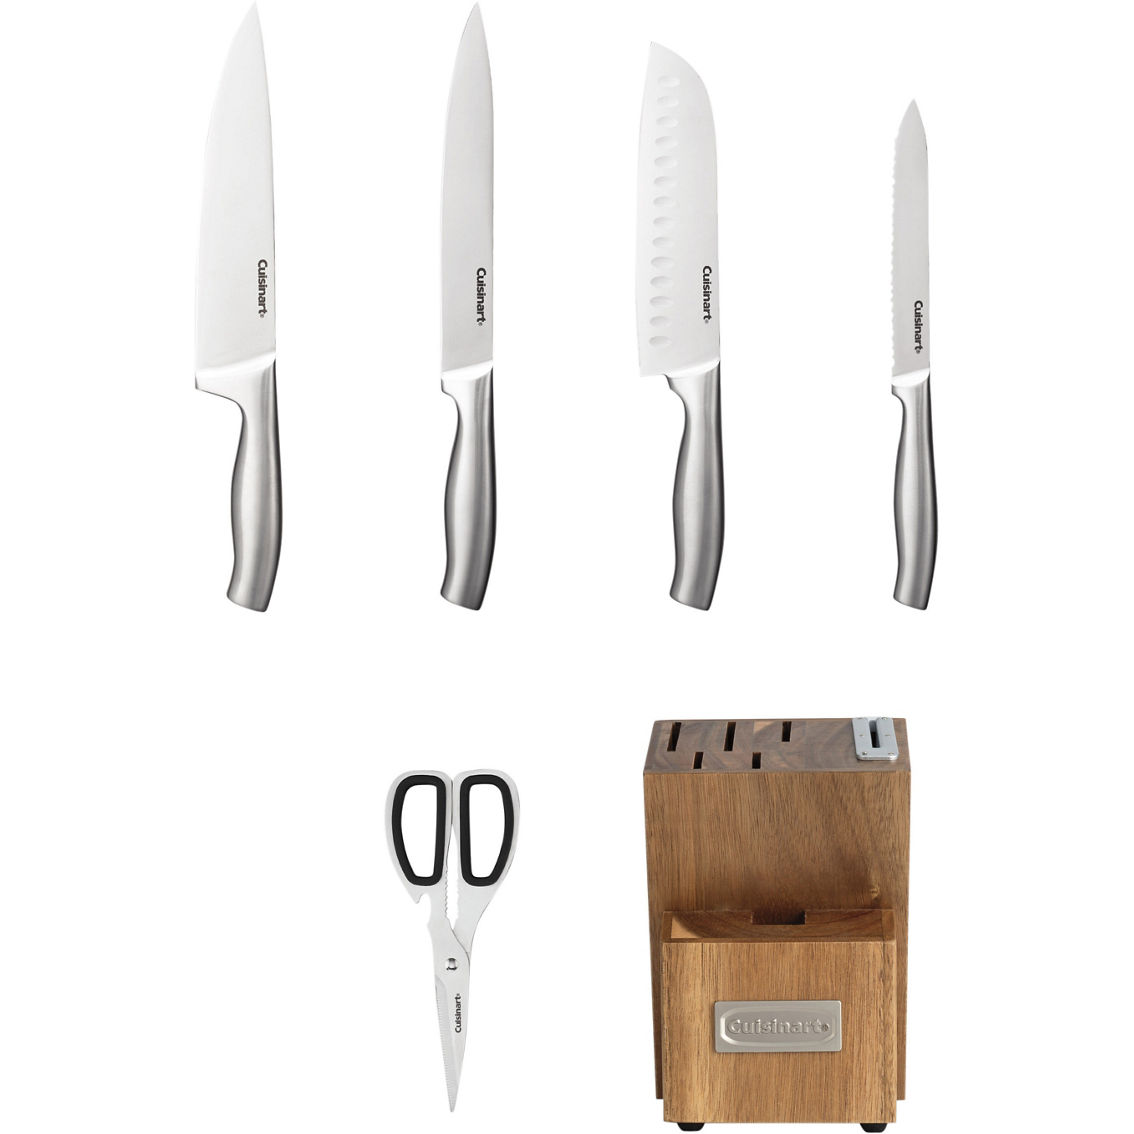 Cuisinart 7 pc. Stainless Steel Essentials Block Set with Built in Sharpener - Image 3 of 3